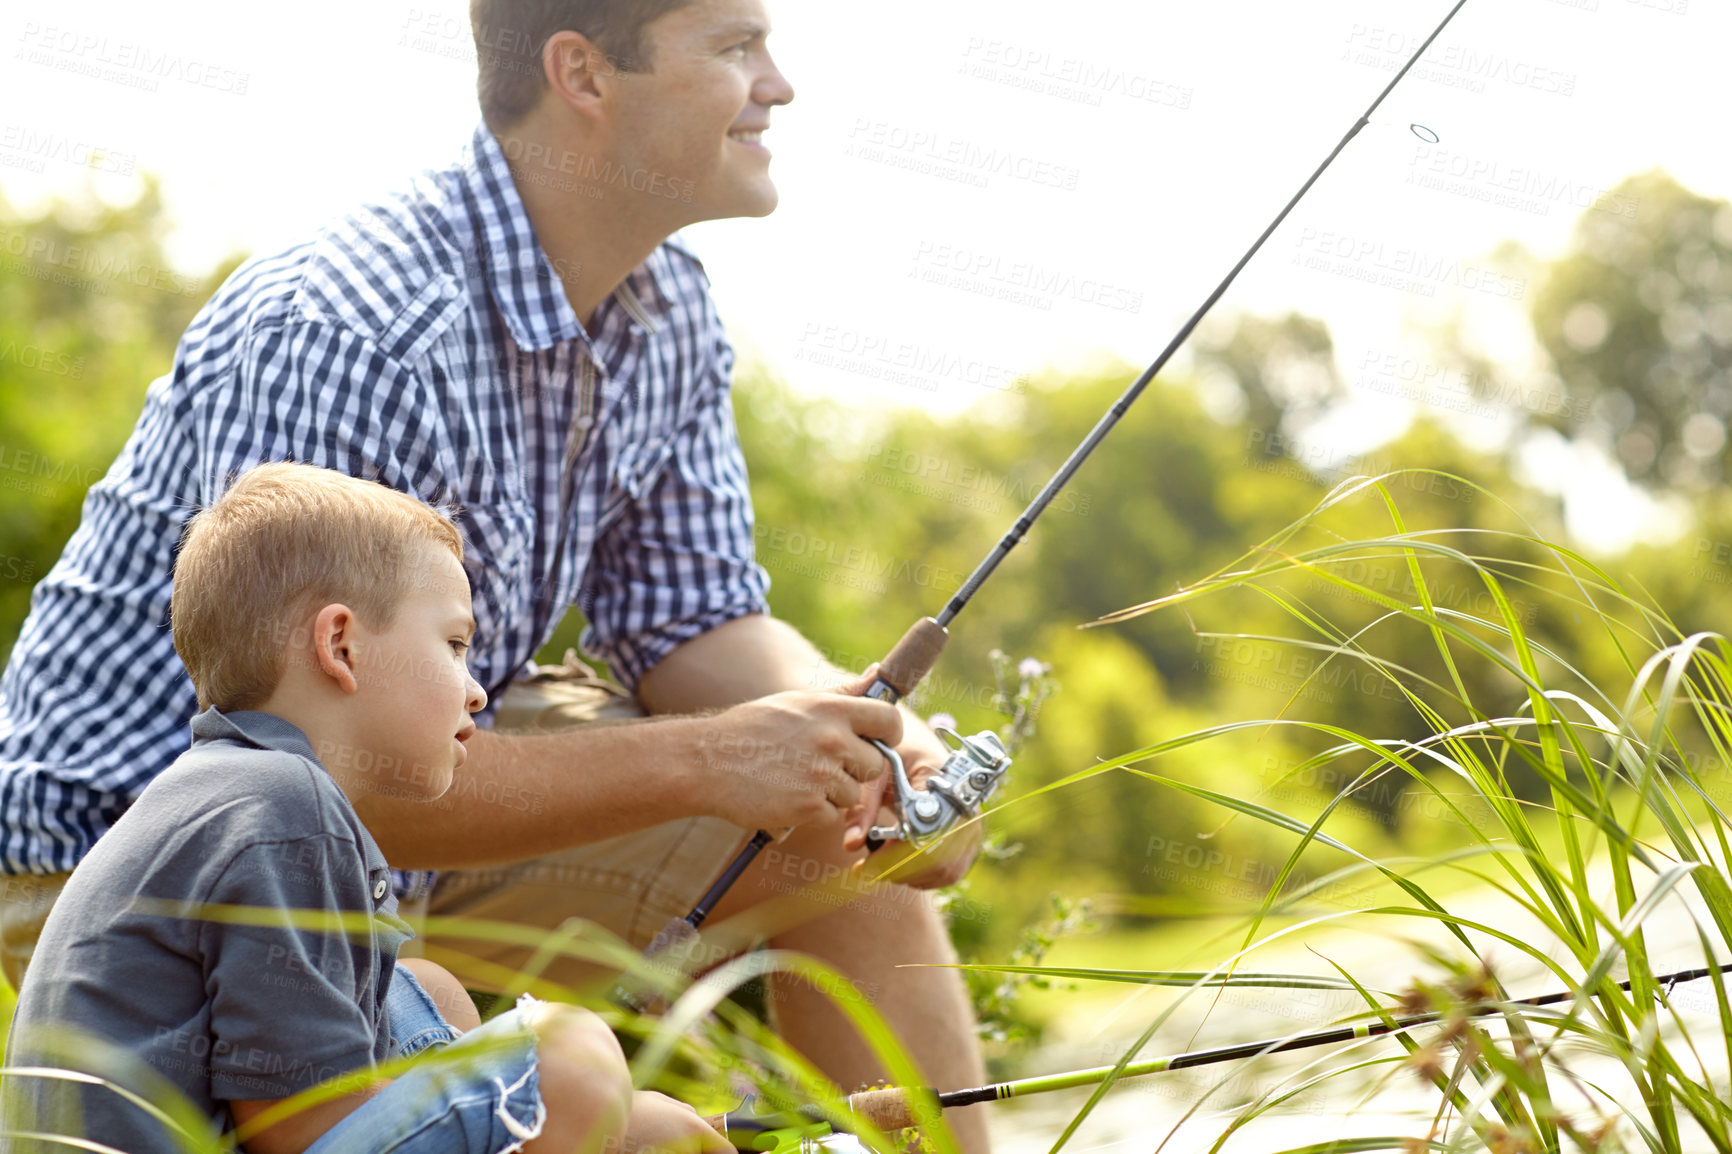 Buy stock photo Side view of a cute young boy sitting with his dad waiting to catch a fish